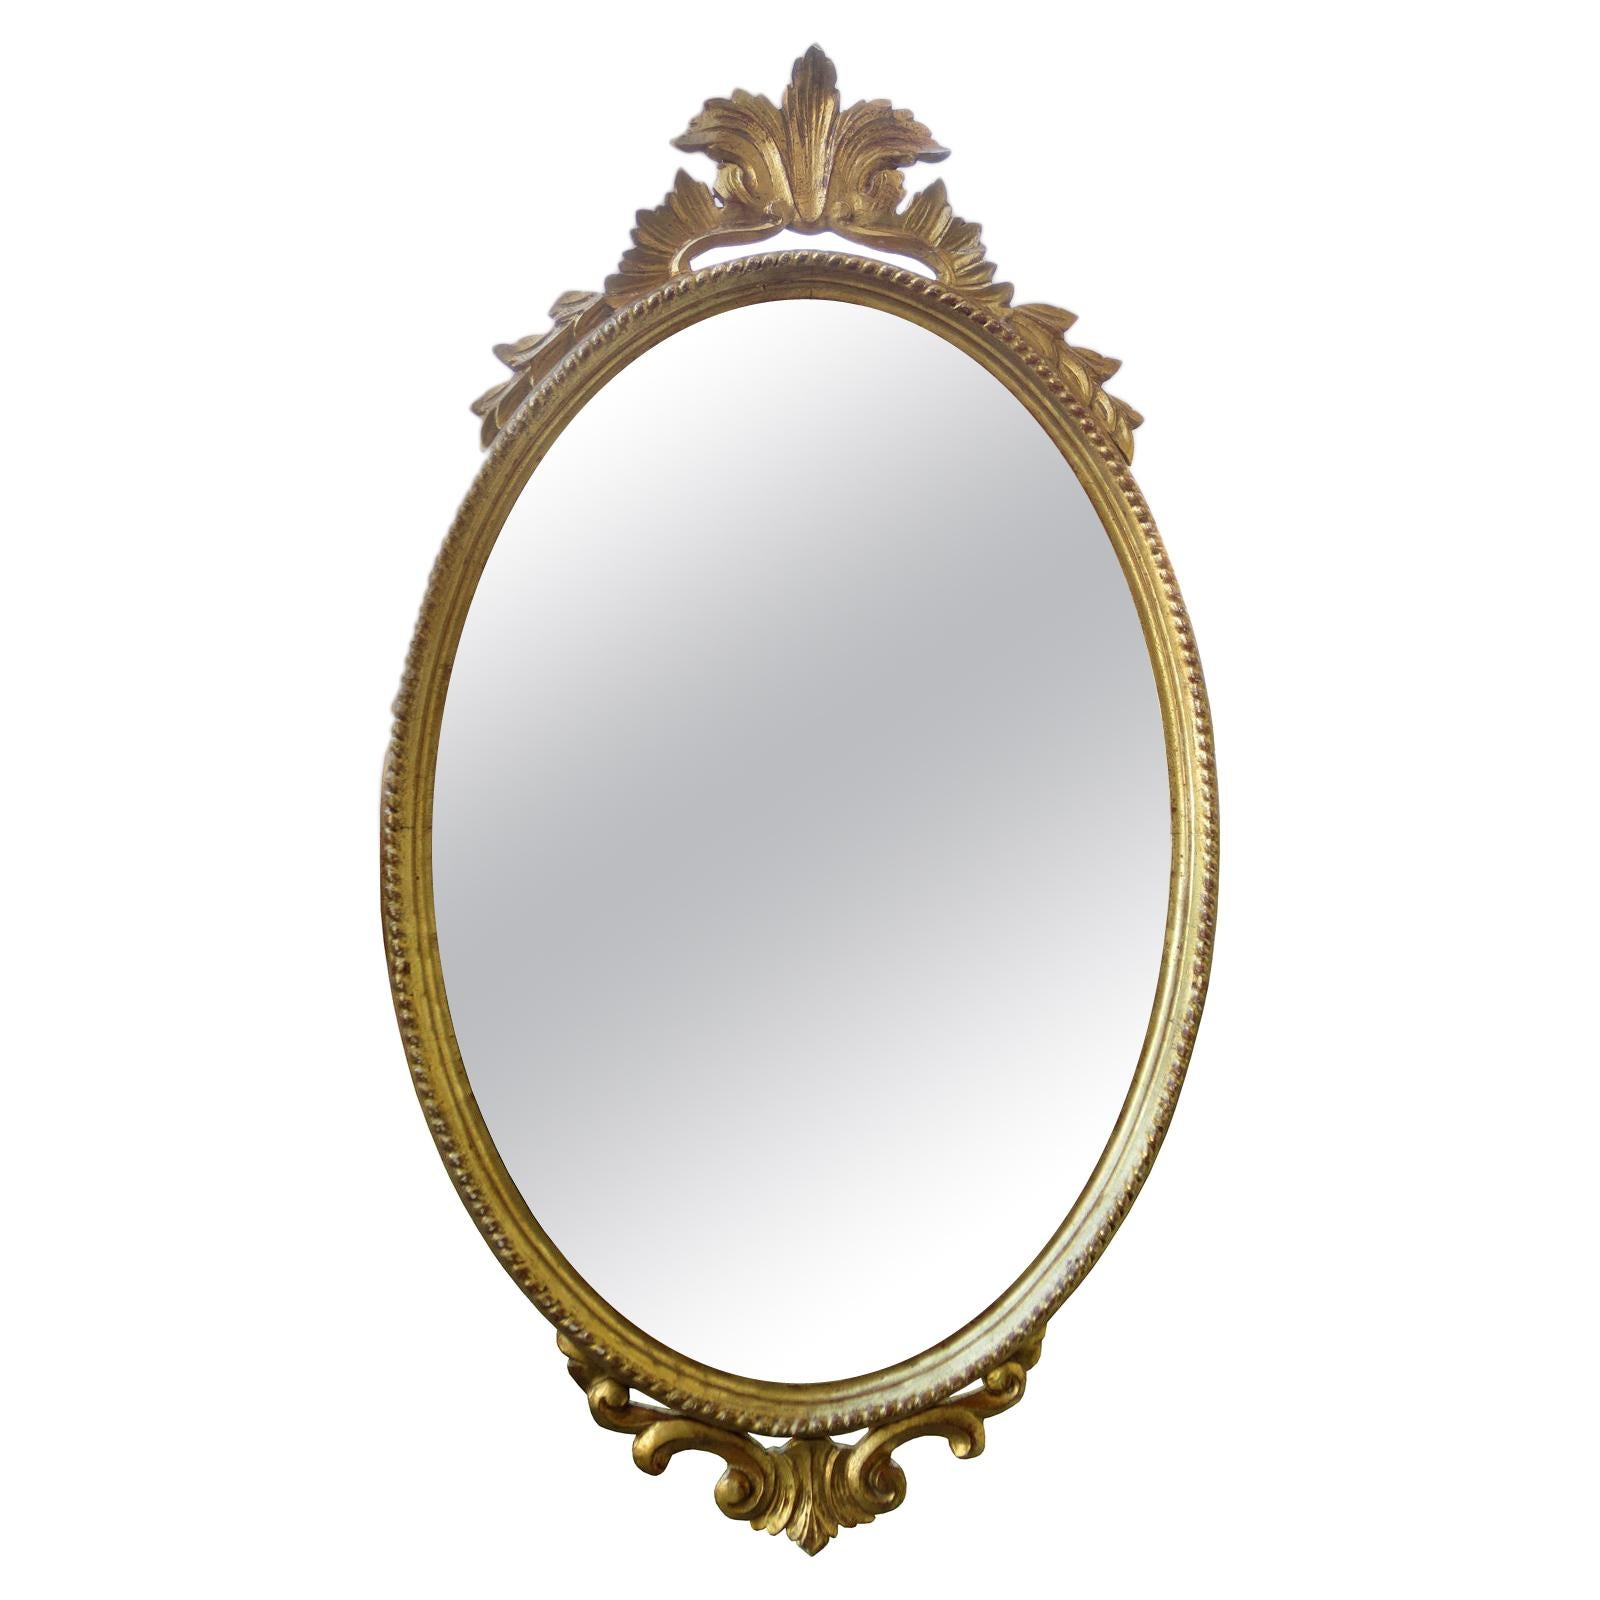 20th Century Italian Oval Giltwood Mirror with Plume